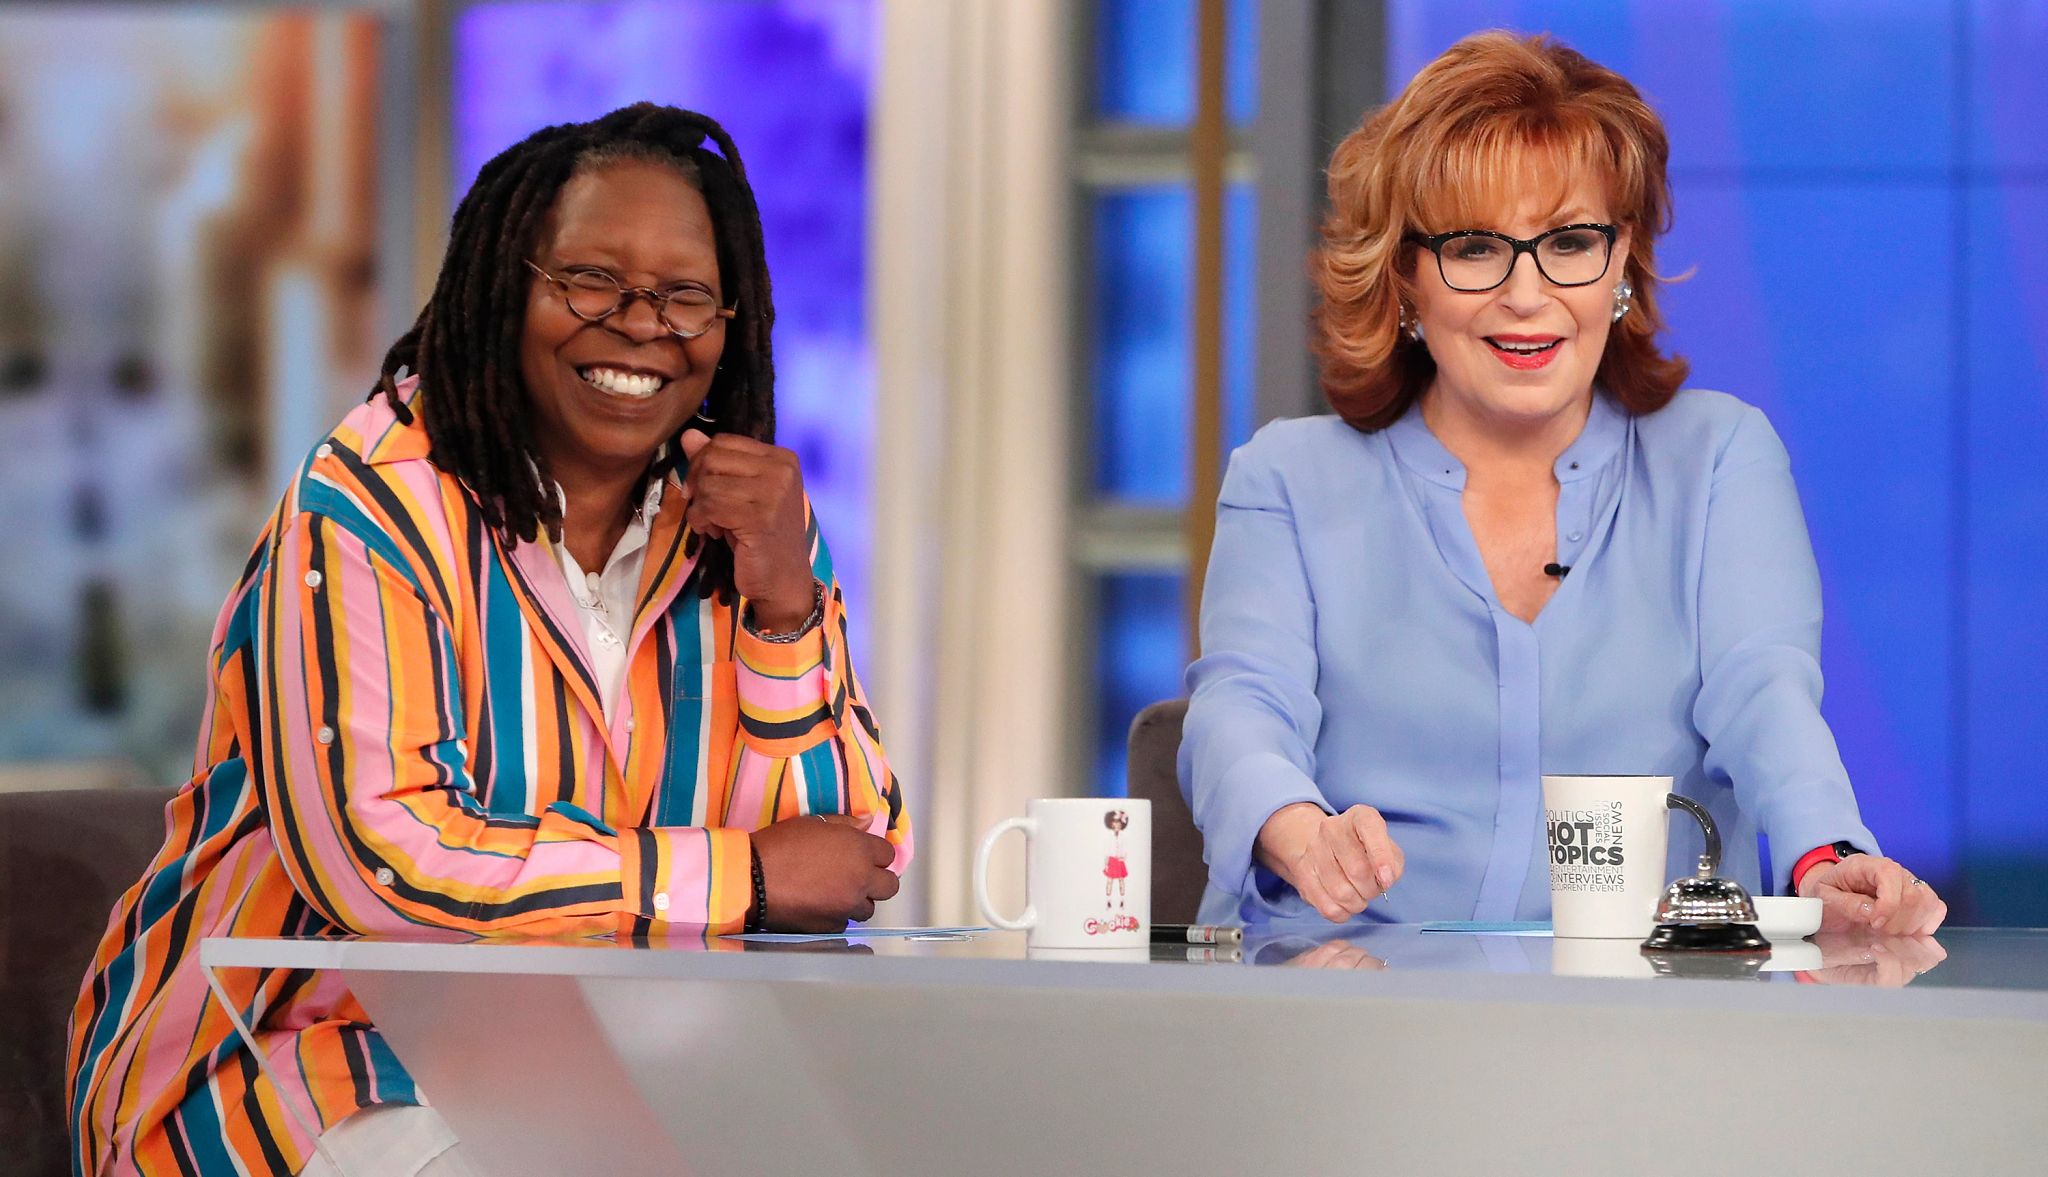 Whoopi Goldberg sitting next to Joy Behar at a desk with a mug in front of each of them